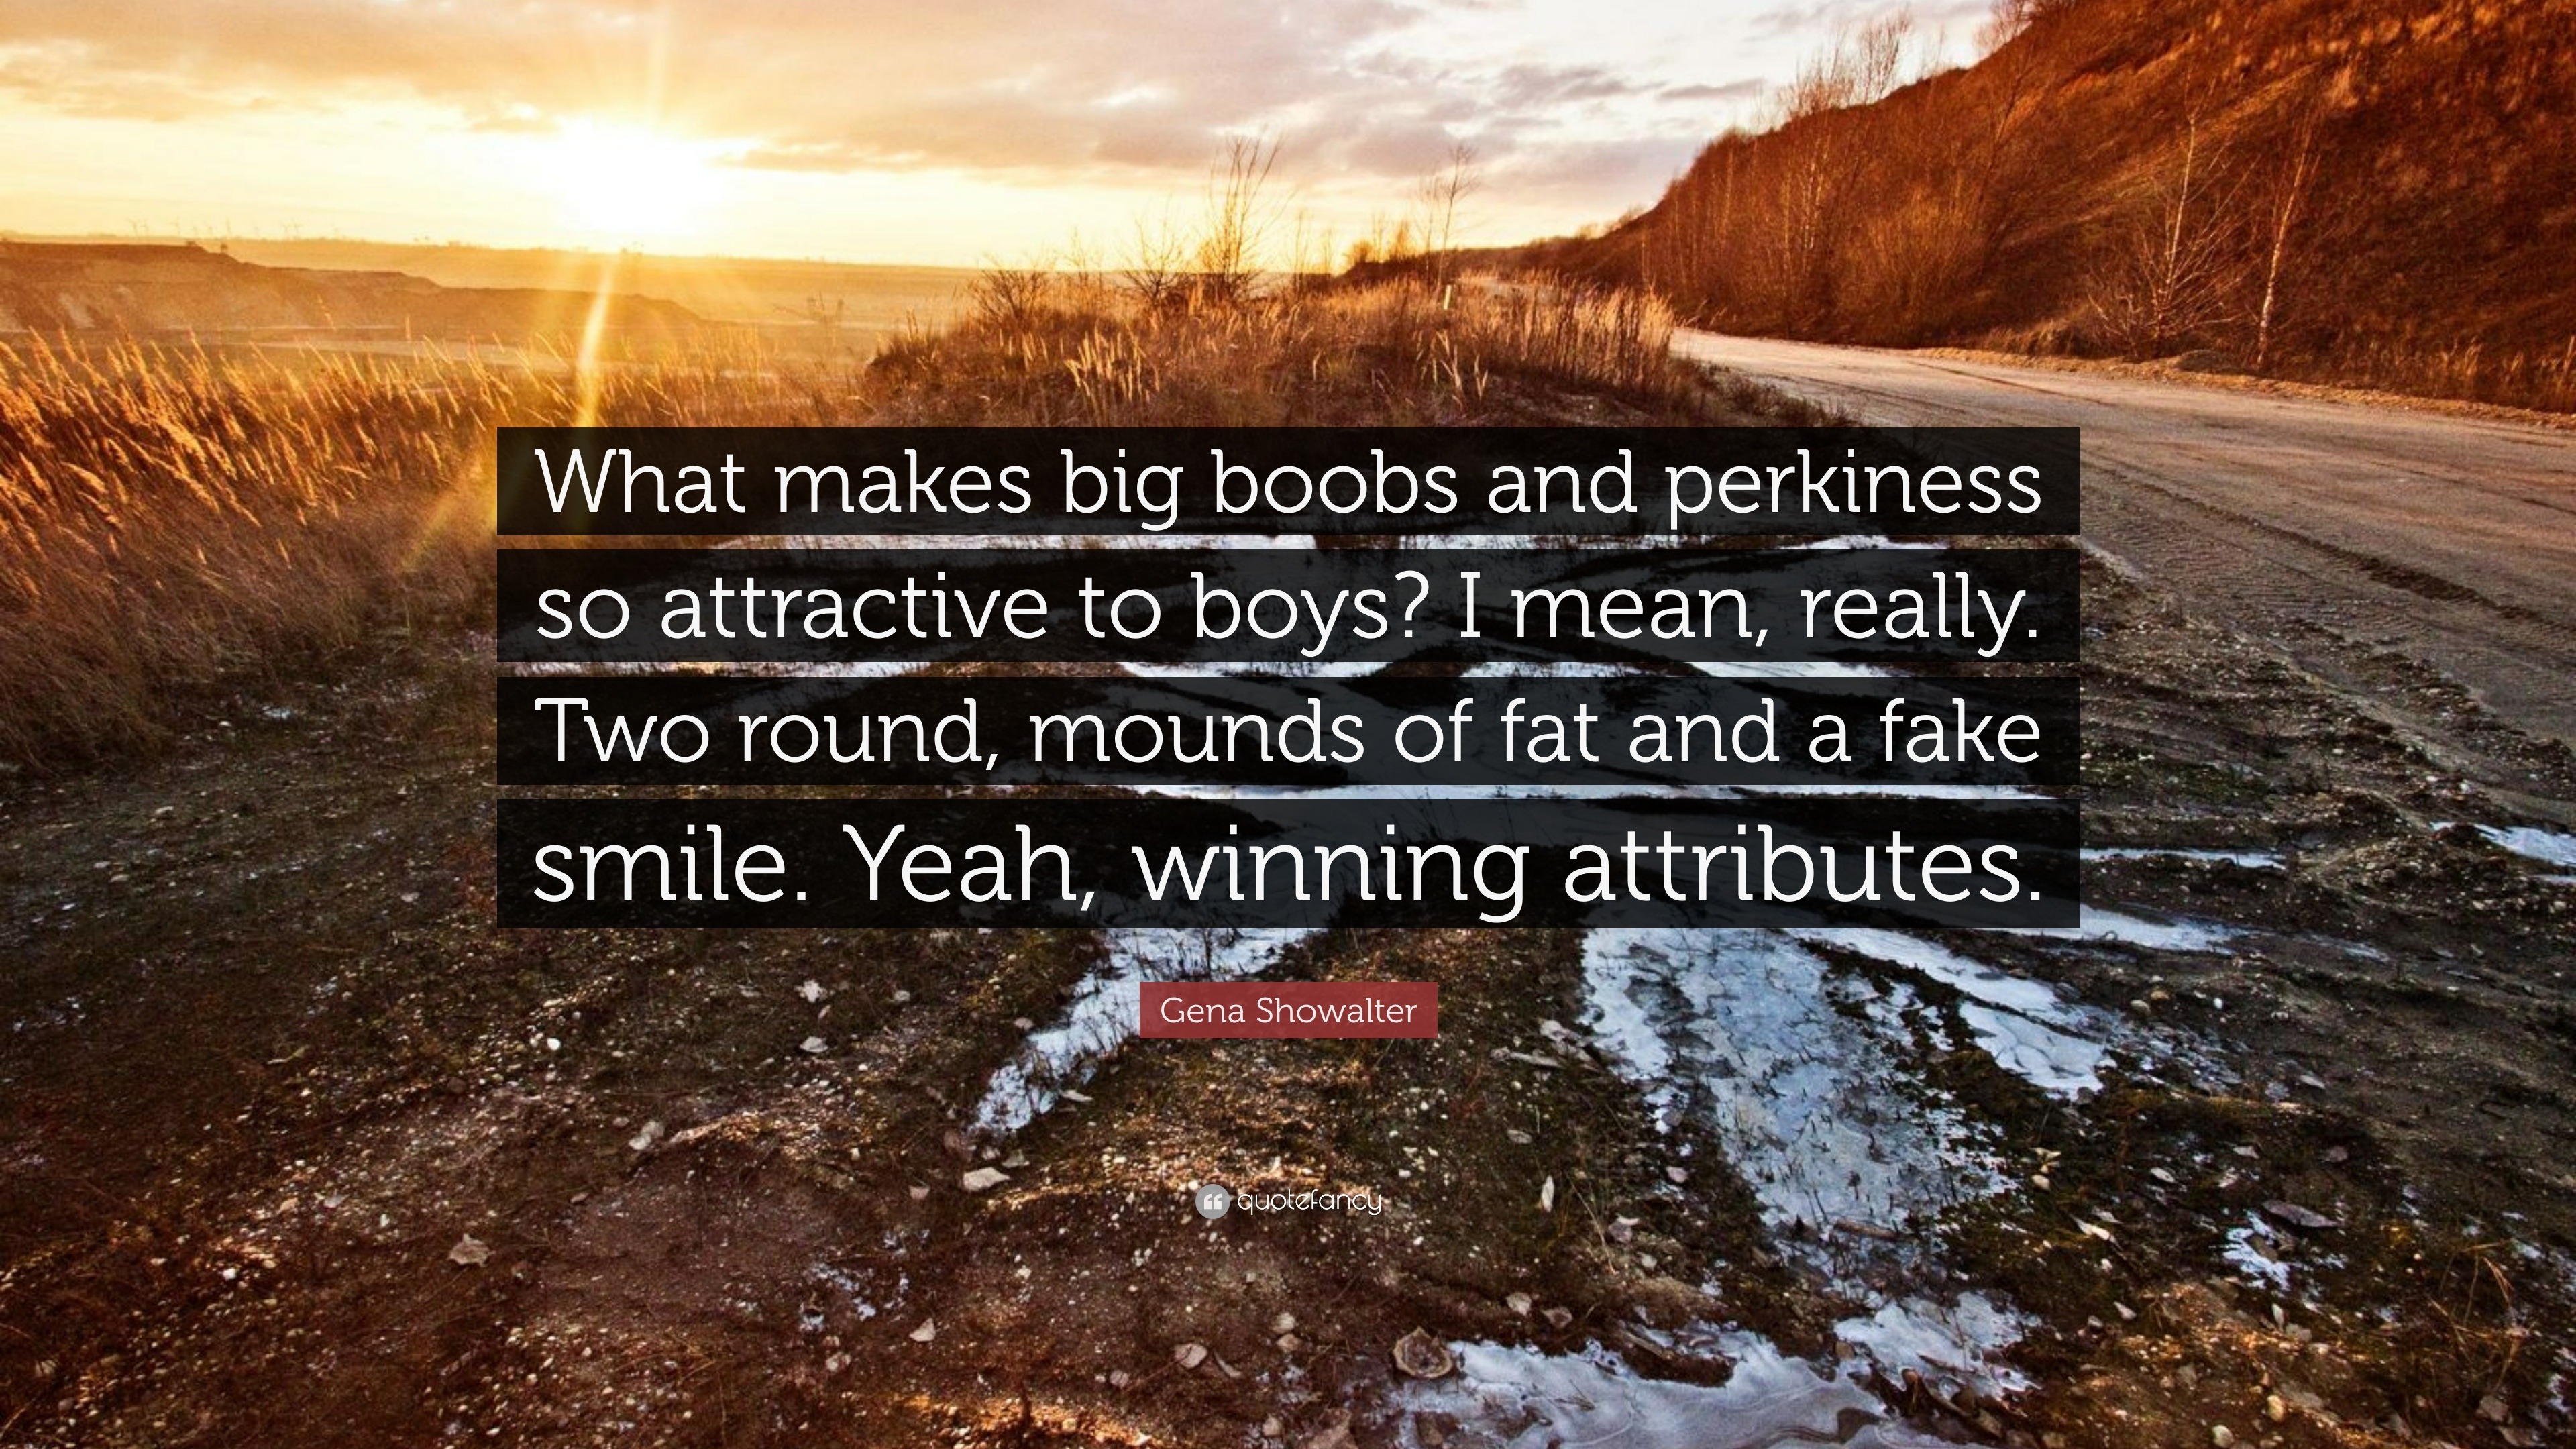 Gena Showalter Quote: “What makes big boobs and perkiness so